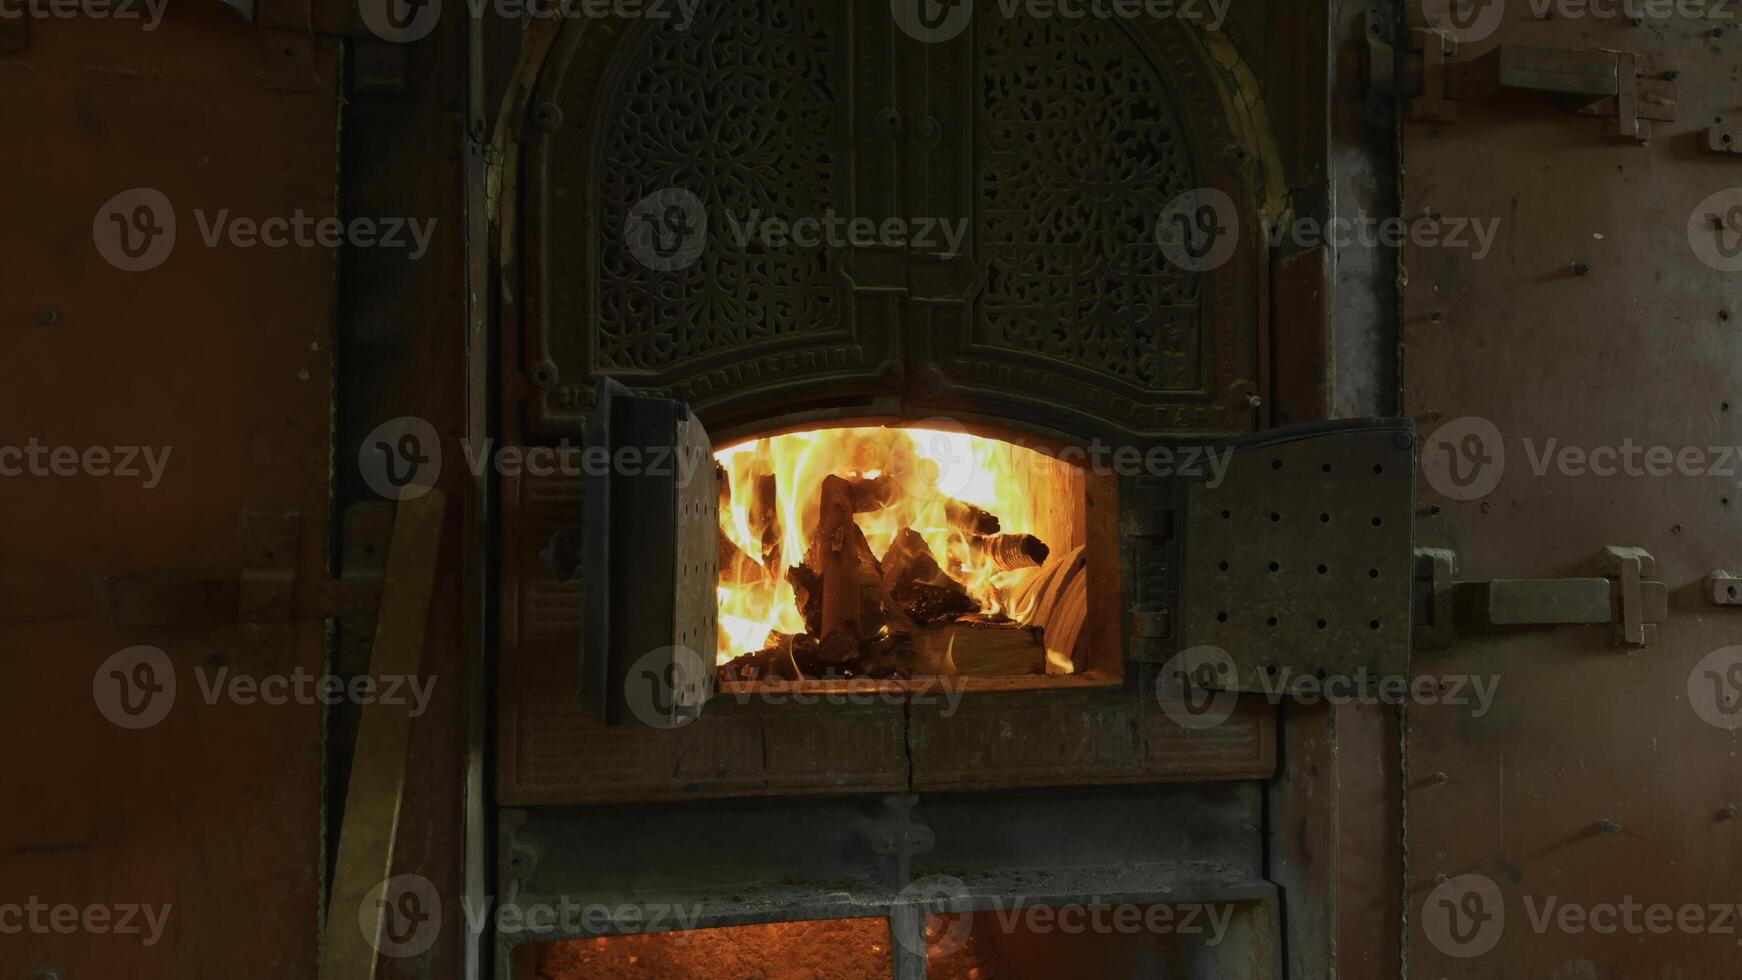 Old stove with firewood in summer. Action. Beautiful oven doors in wall with fire. Outdoor stove with burning wood inside on summer day photo